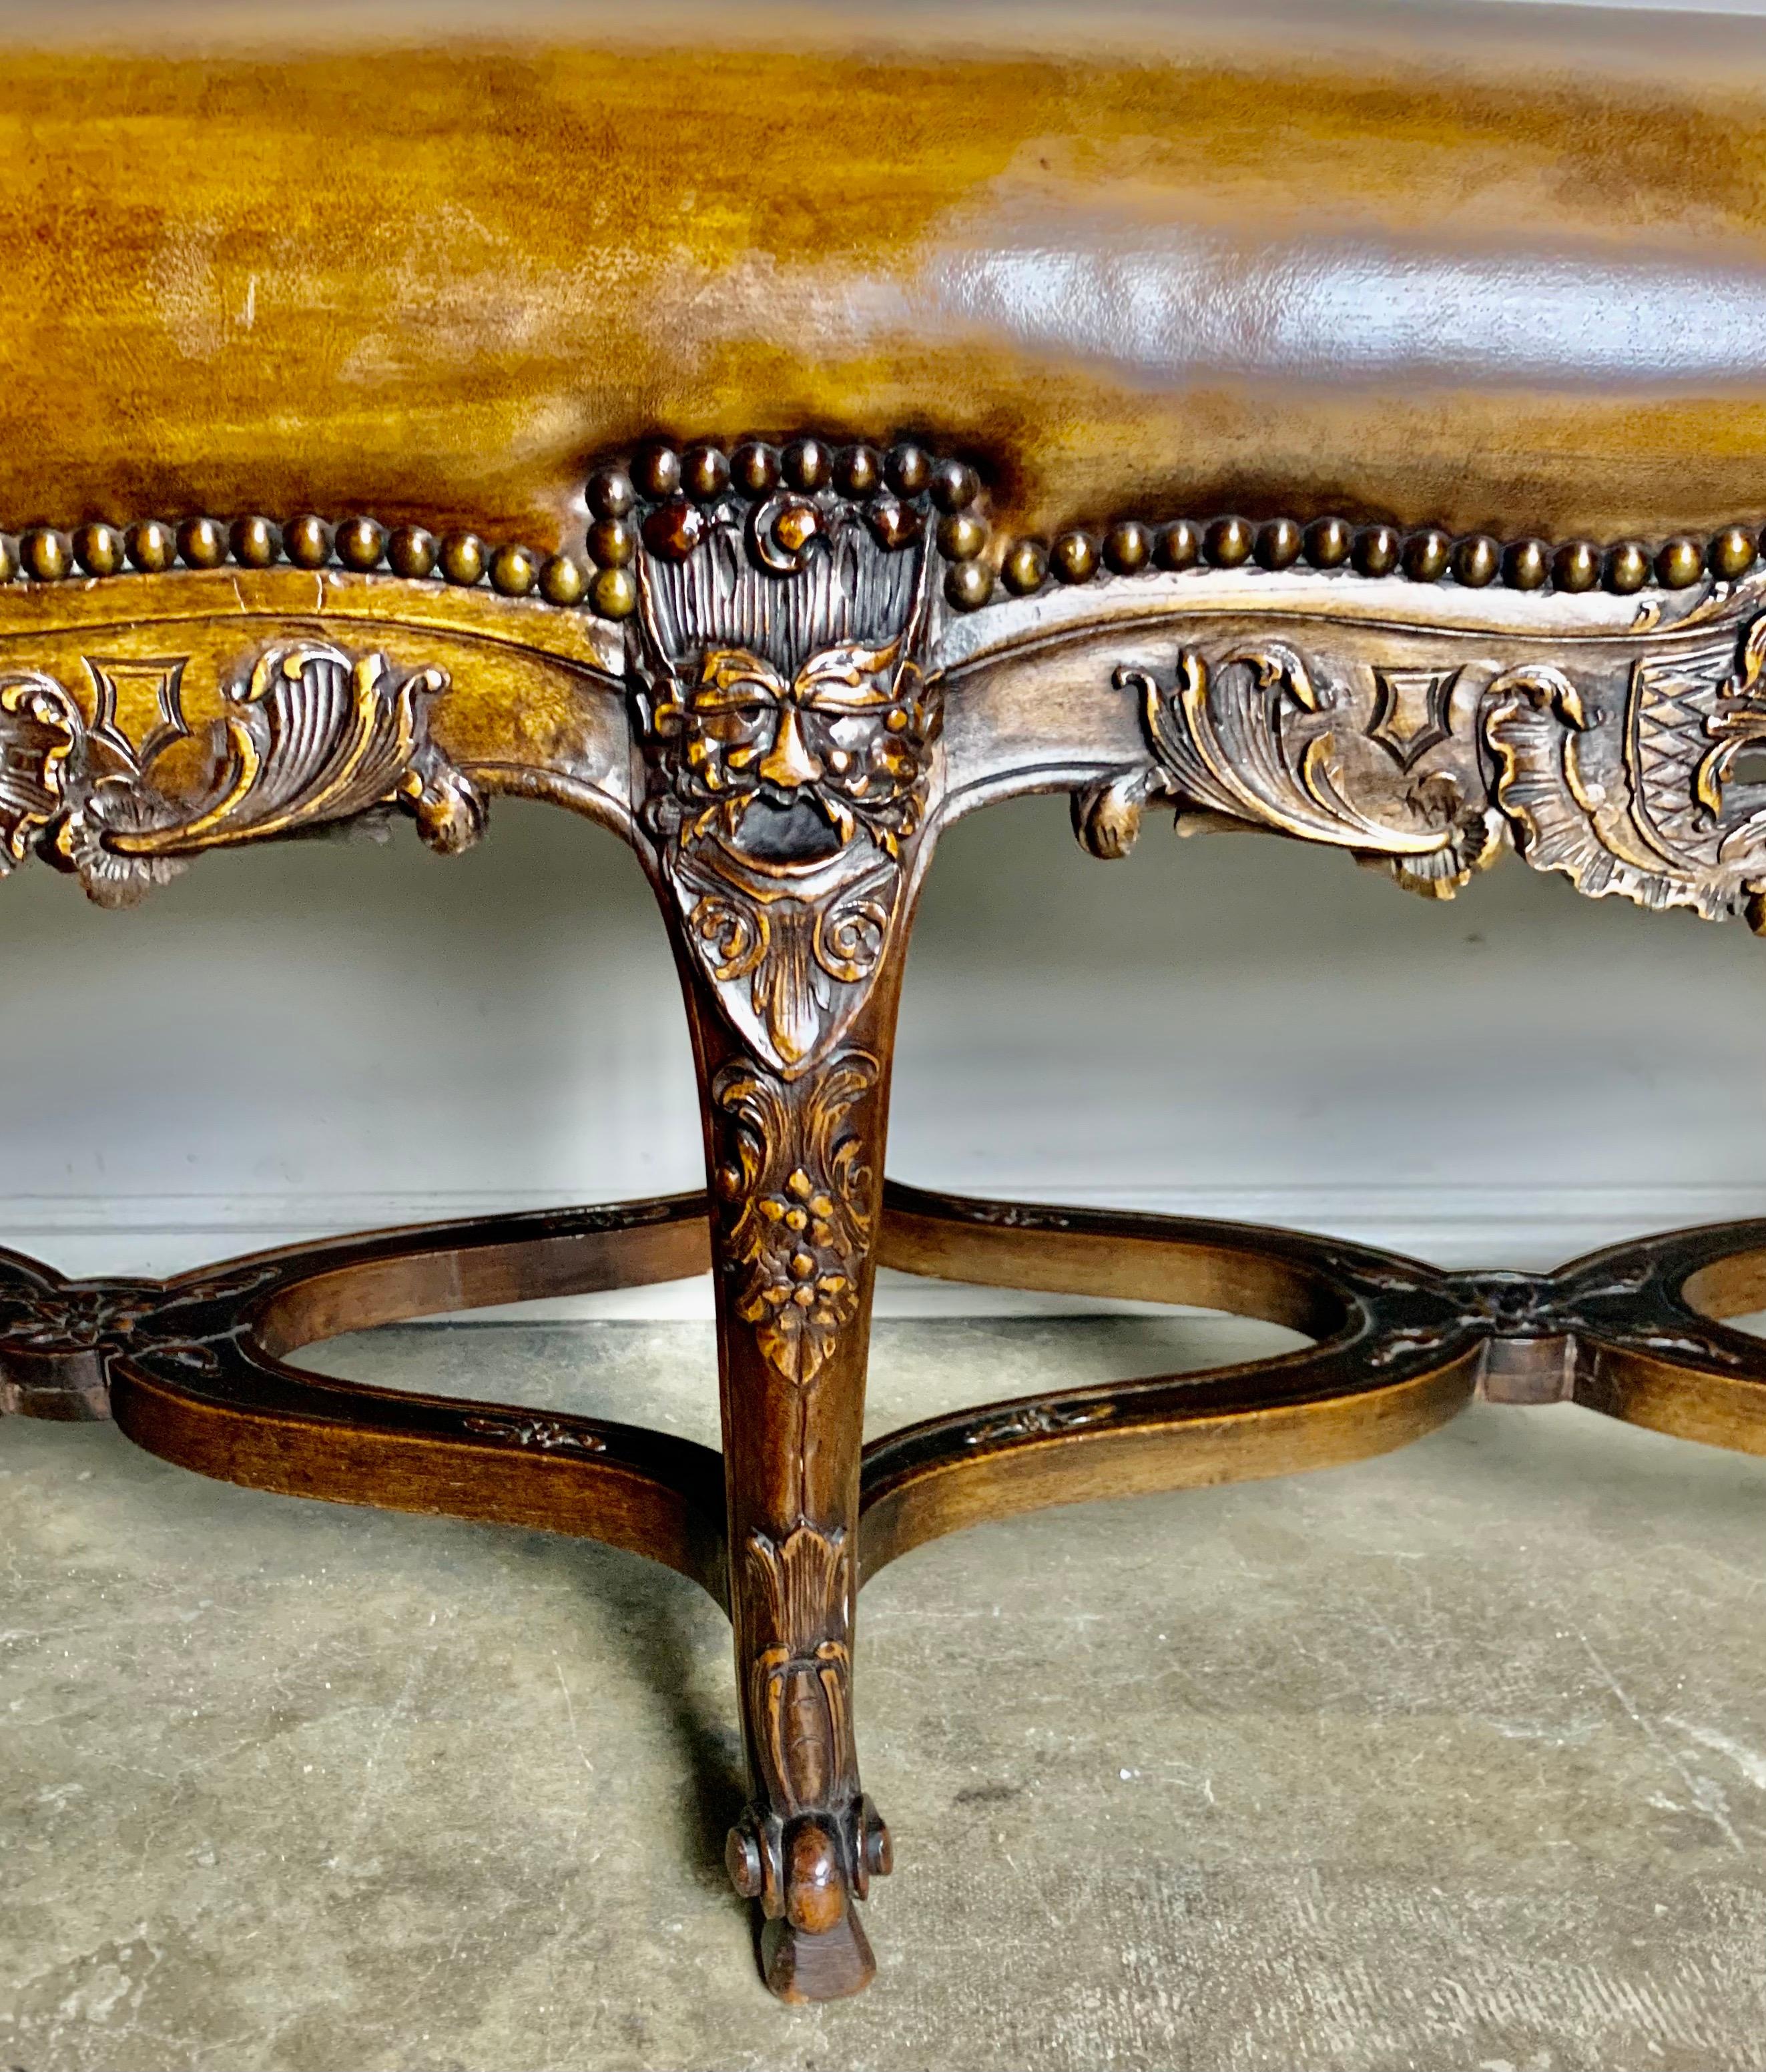 Early 20th Century Six Legged French Carved Leather Bench C. 1900's